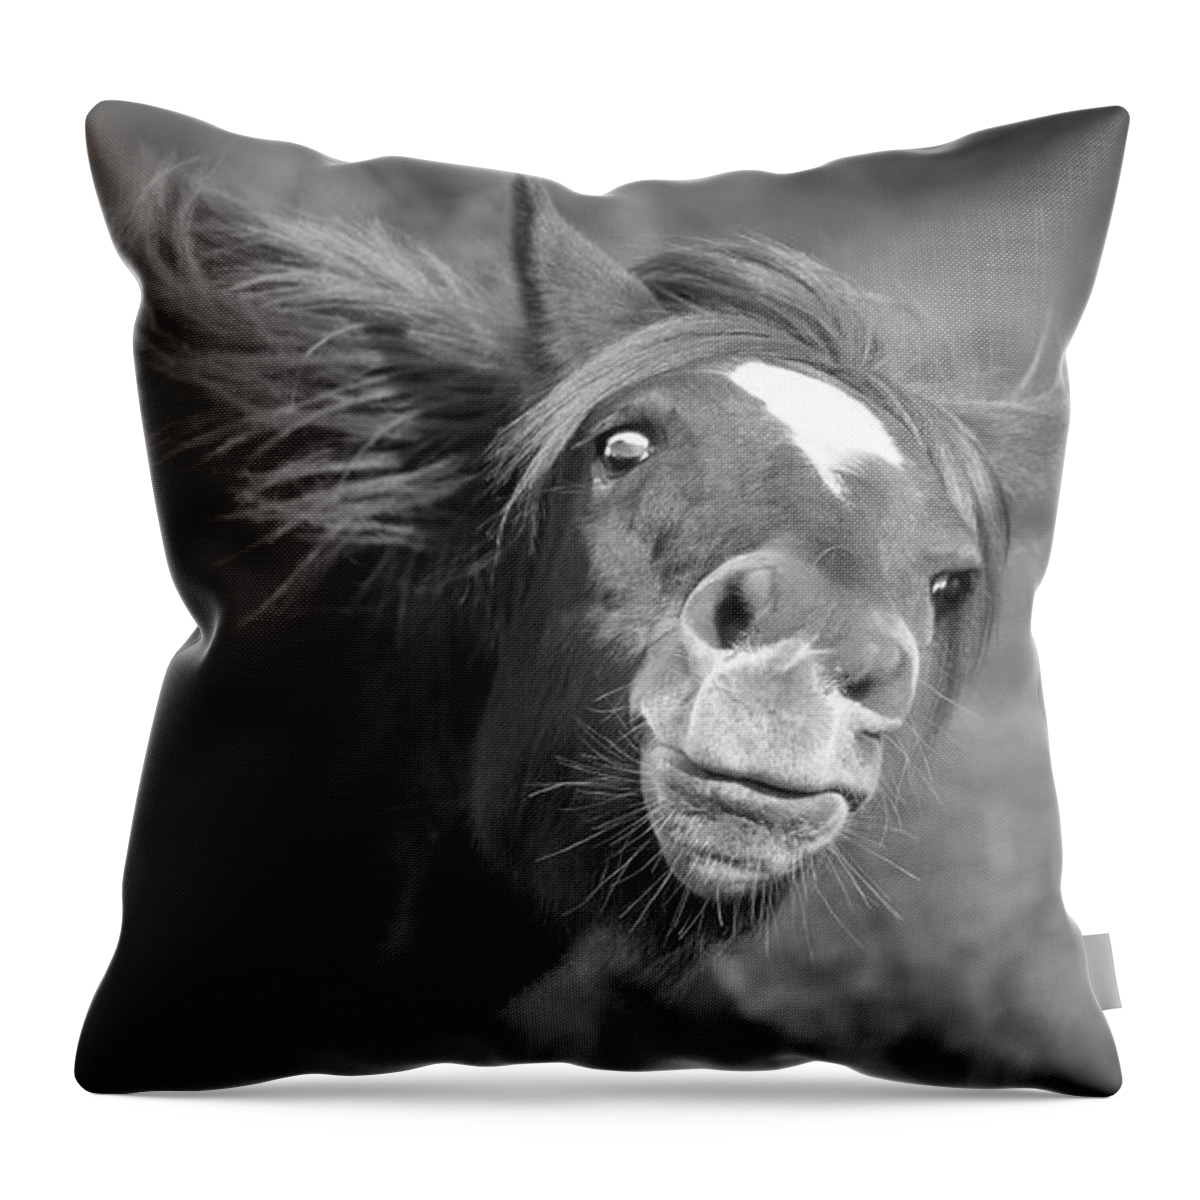 Stallion Throw Pillow featuring the photograph A Galloping Glance. by Paul Martin